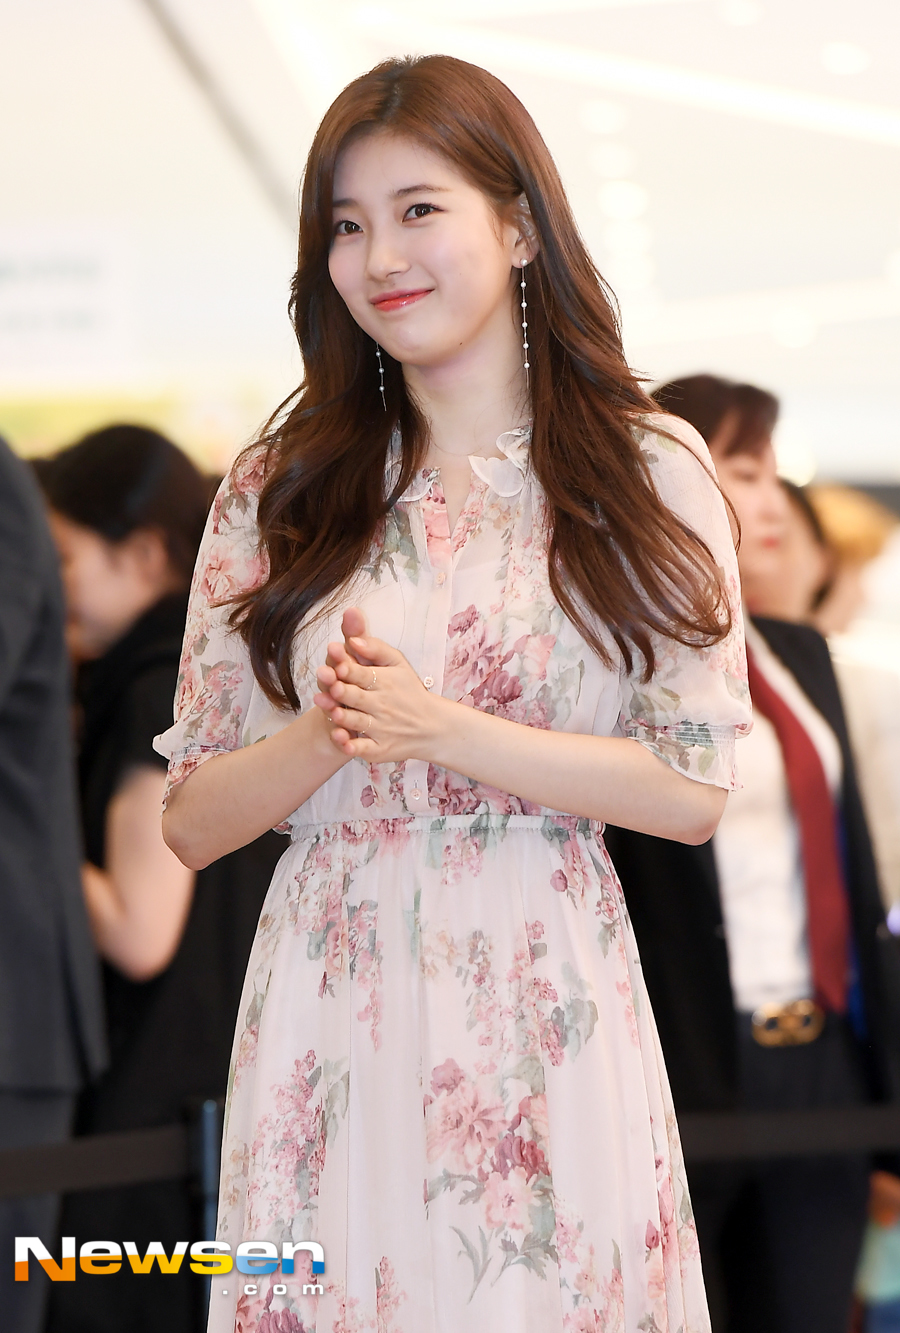 Singer and actor Bae Suzy Lancome photo call event was held at Myeongdong branch of Shinsegae Duty Free Shop in Jung-gu, Seoul on July 19 at 2 pm.Bae Suzy was present on the day.Meanwhile, Bae Suzy is cast as the NISs Black Agent Gohari in the drama Vagabond, which aims to air in 2019, and is in close contact with Lee Seung-gi.Jung Yu-jin